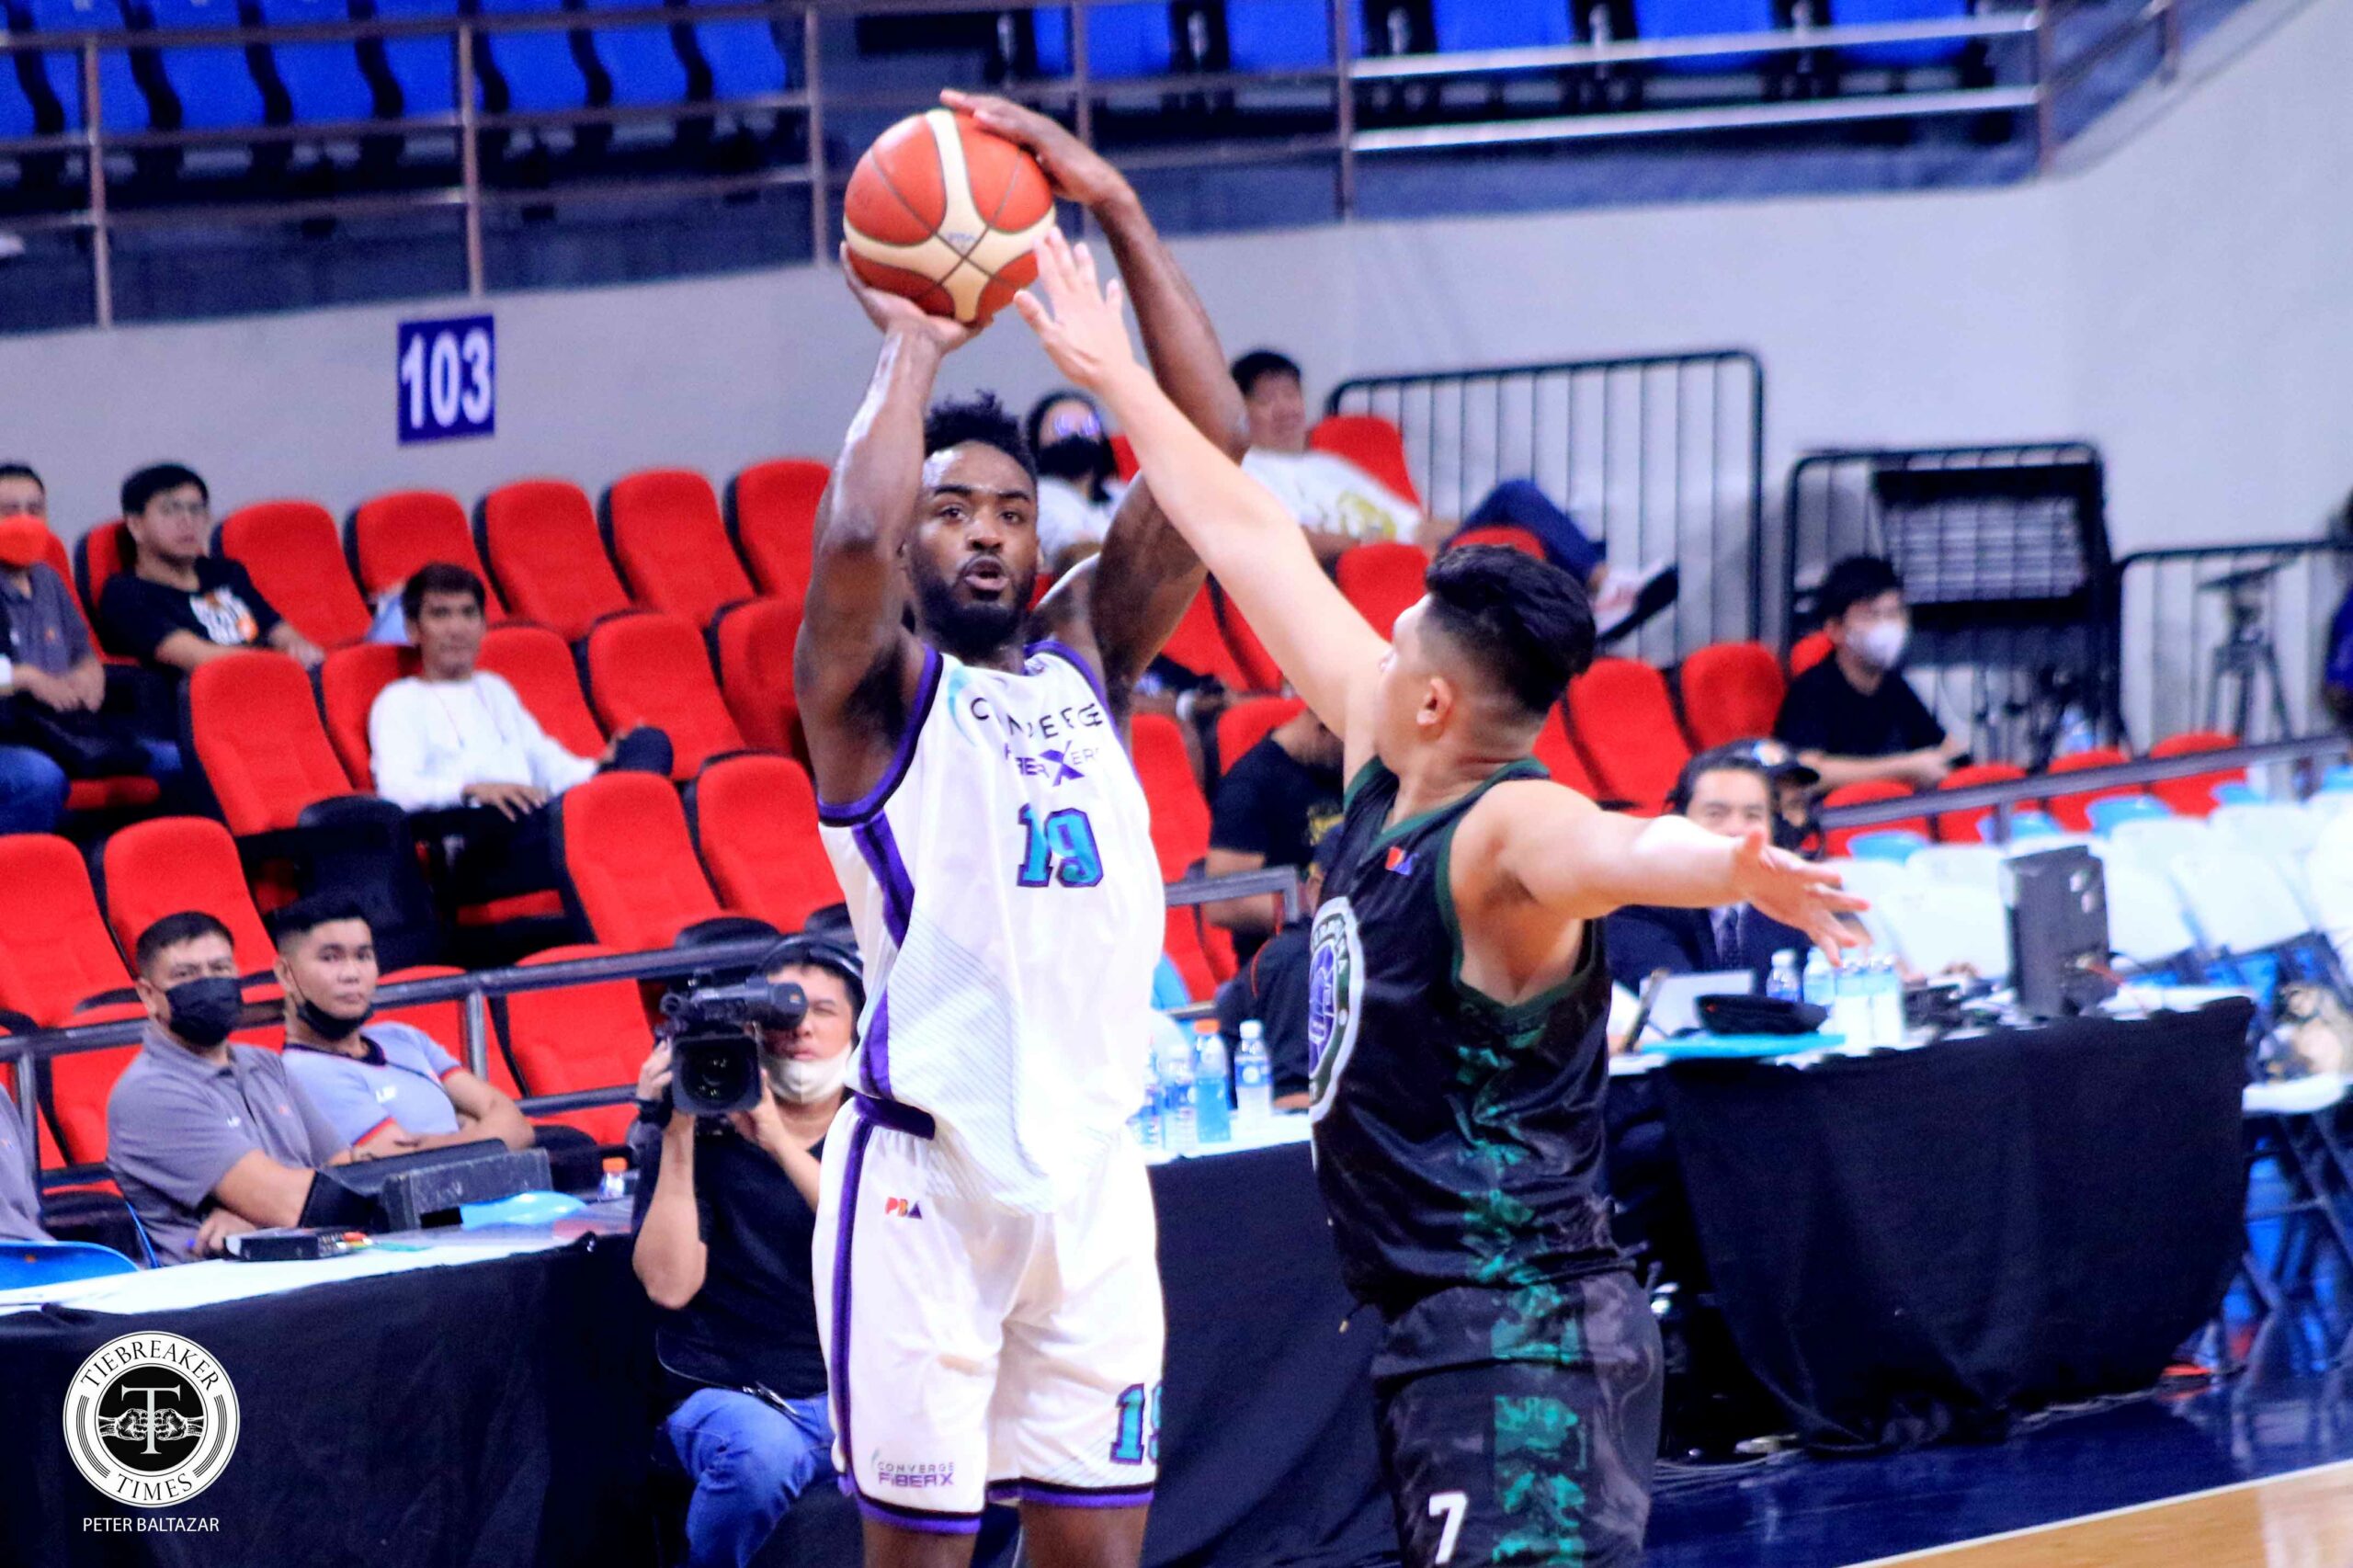 2023-PBA-Governors-Cup-Terrafirma-vs-Converge-Jamaal-Franklin-scaled Jamaal Franklin believes they have something going in Converge Basketball News PBA  - philippine sports news